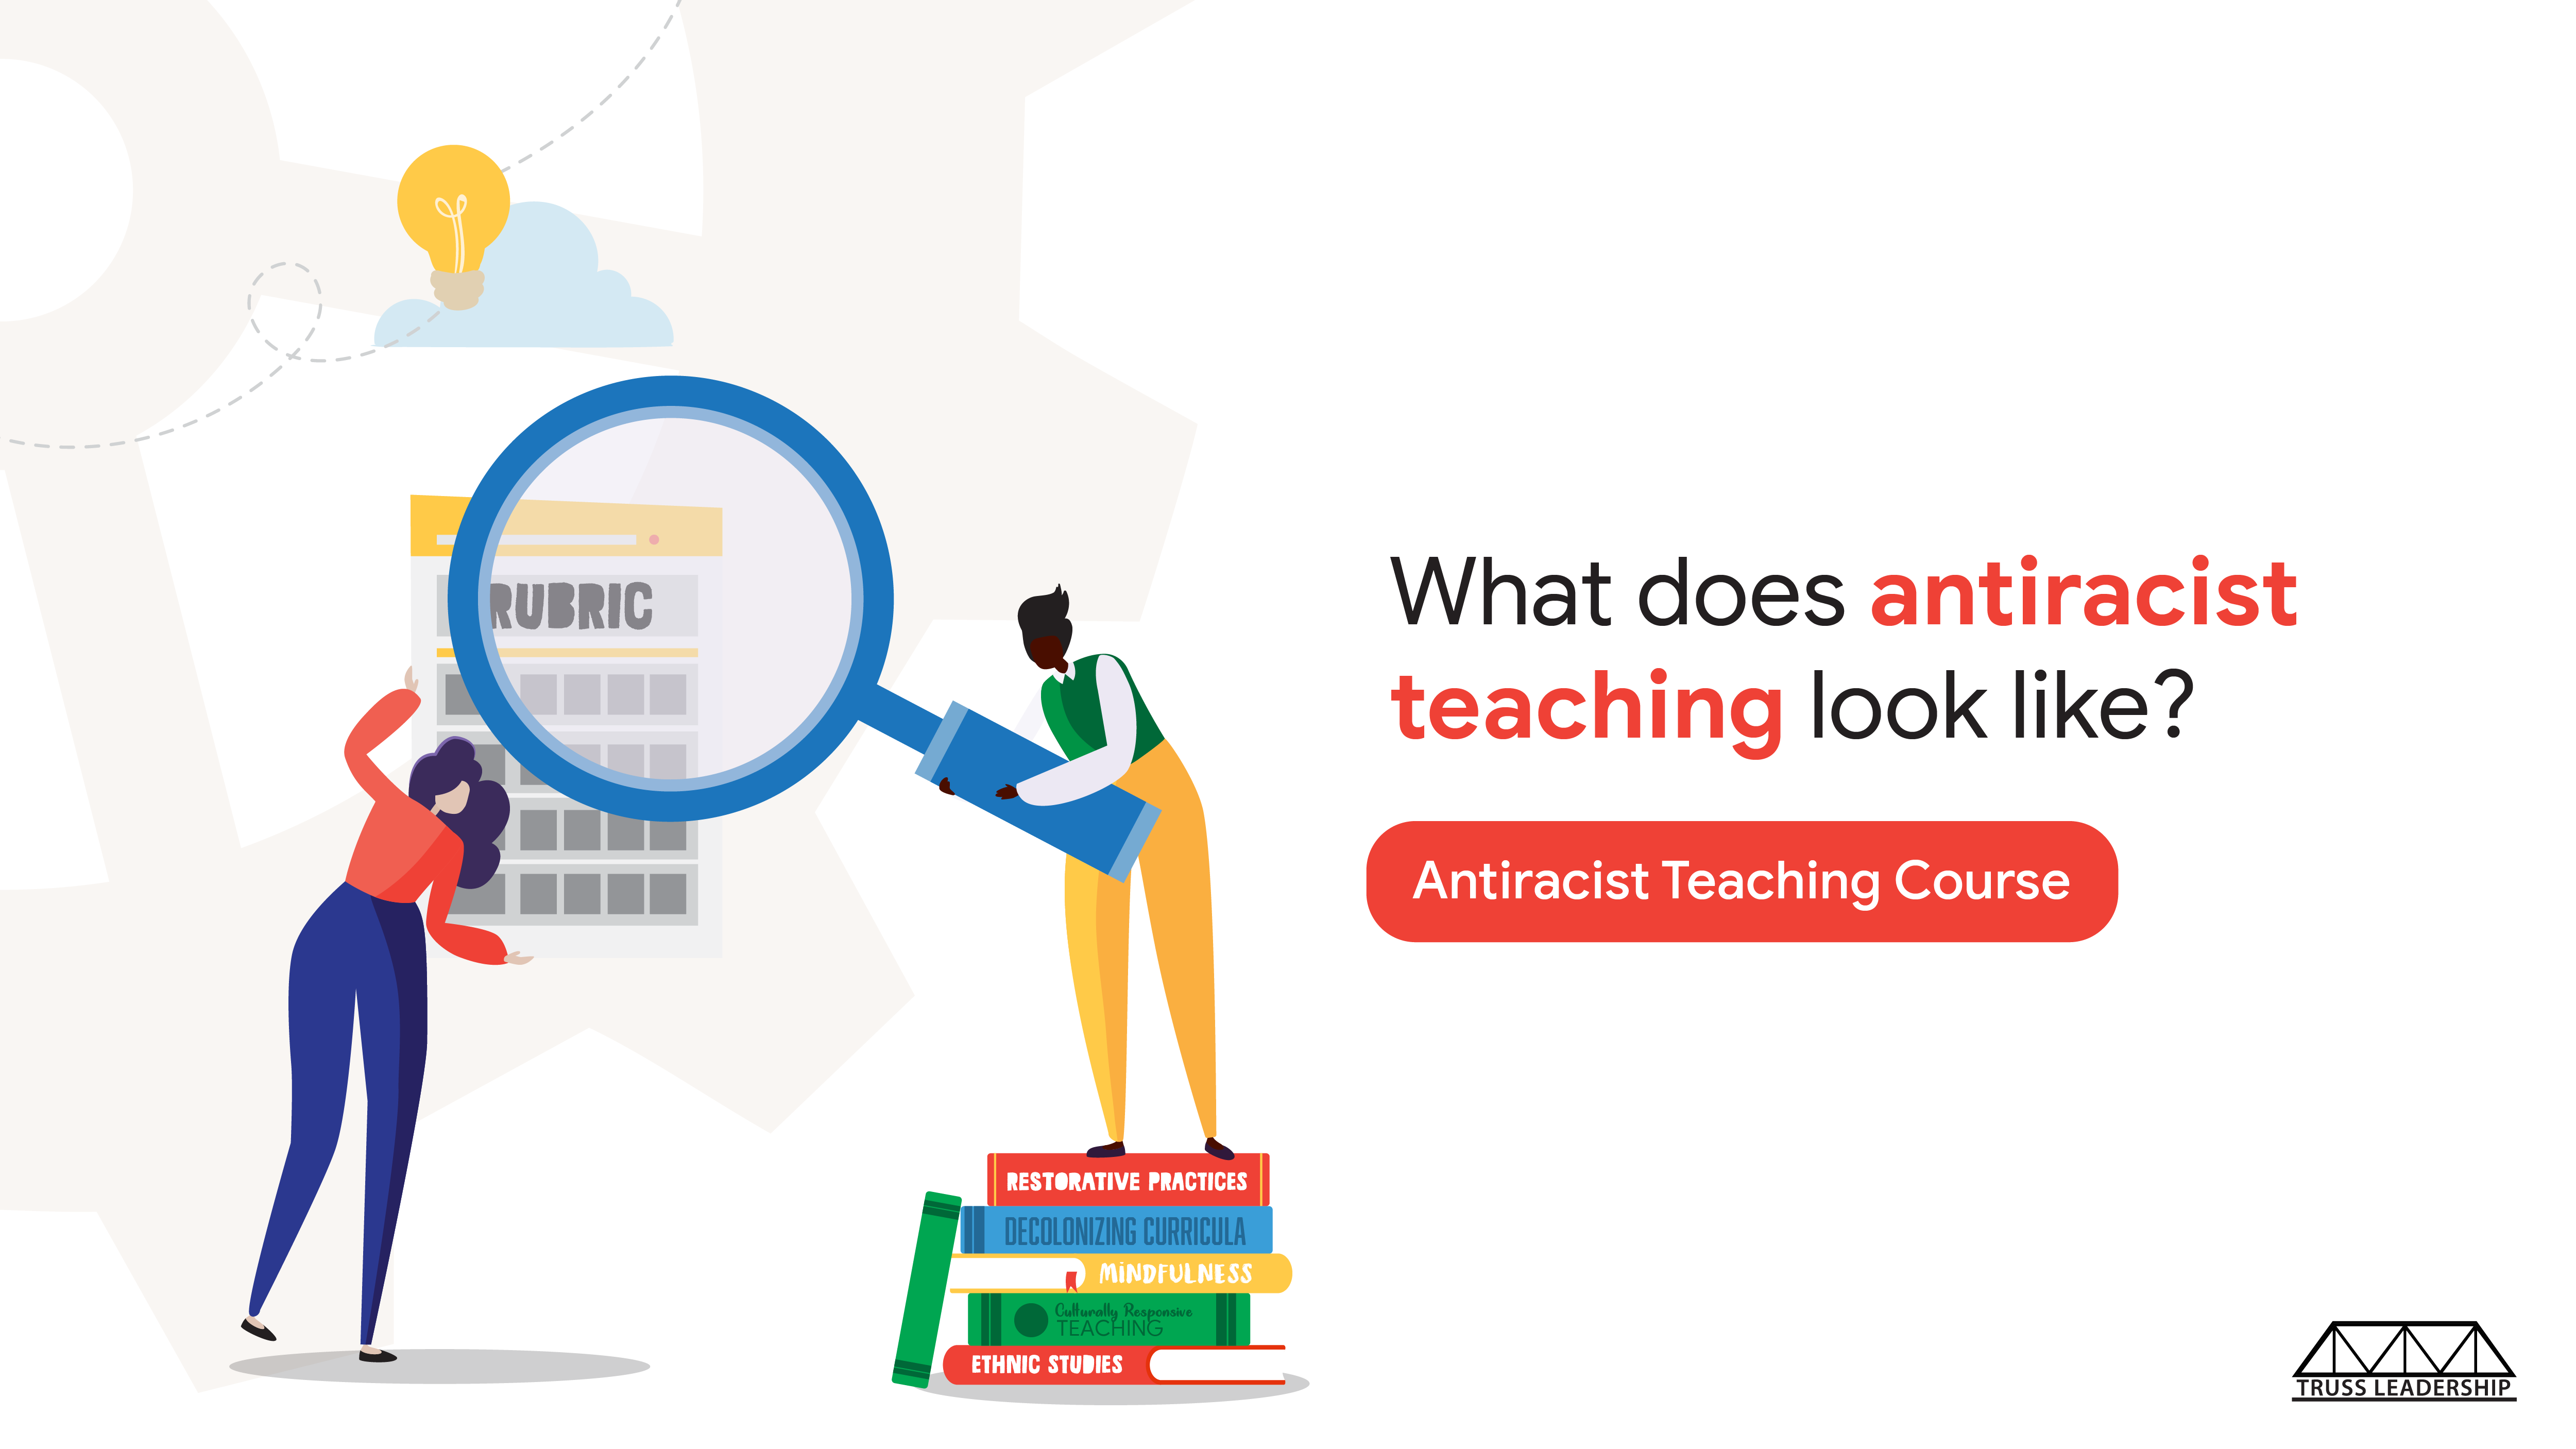 There is a person standing on top of a stack of books holding a magnifying glass. There is a red button with text that says Antiracist Teaching Course.